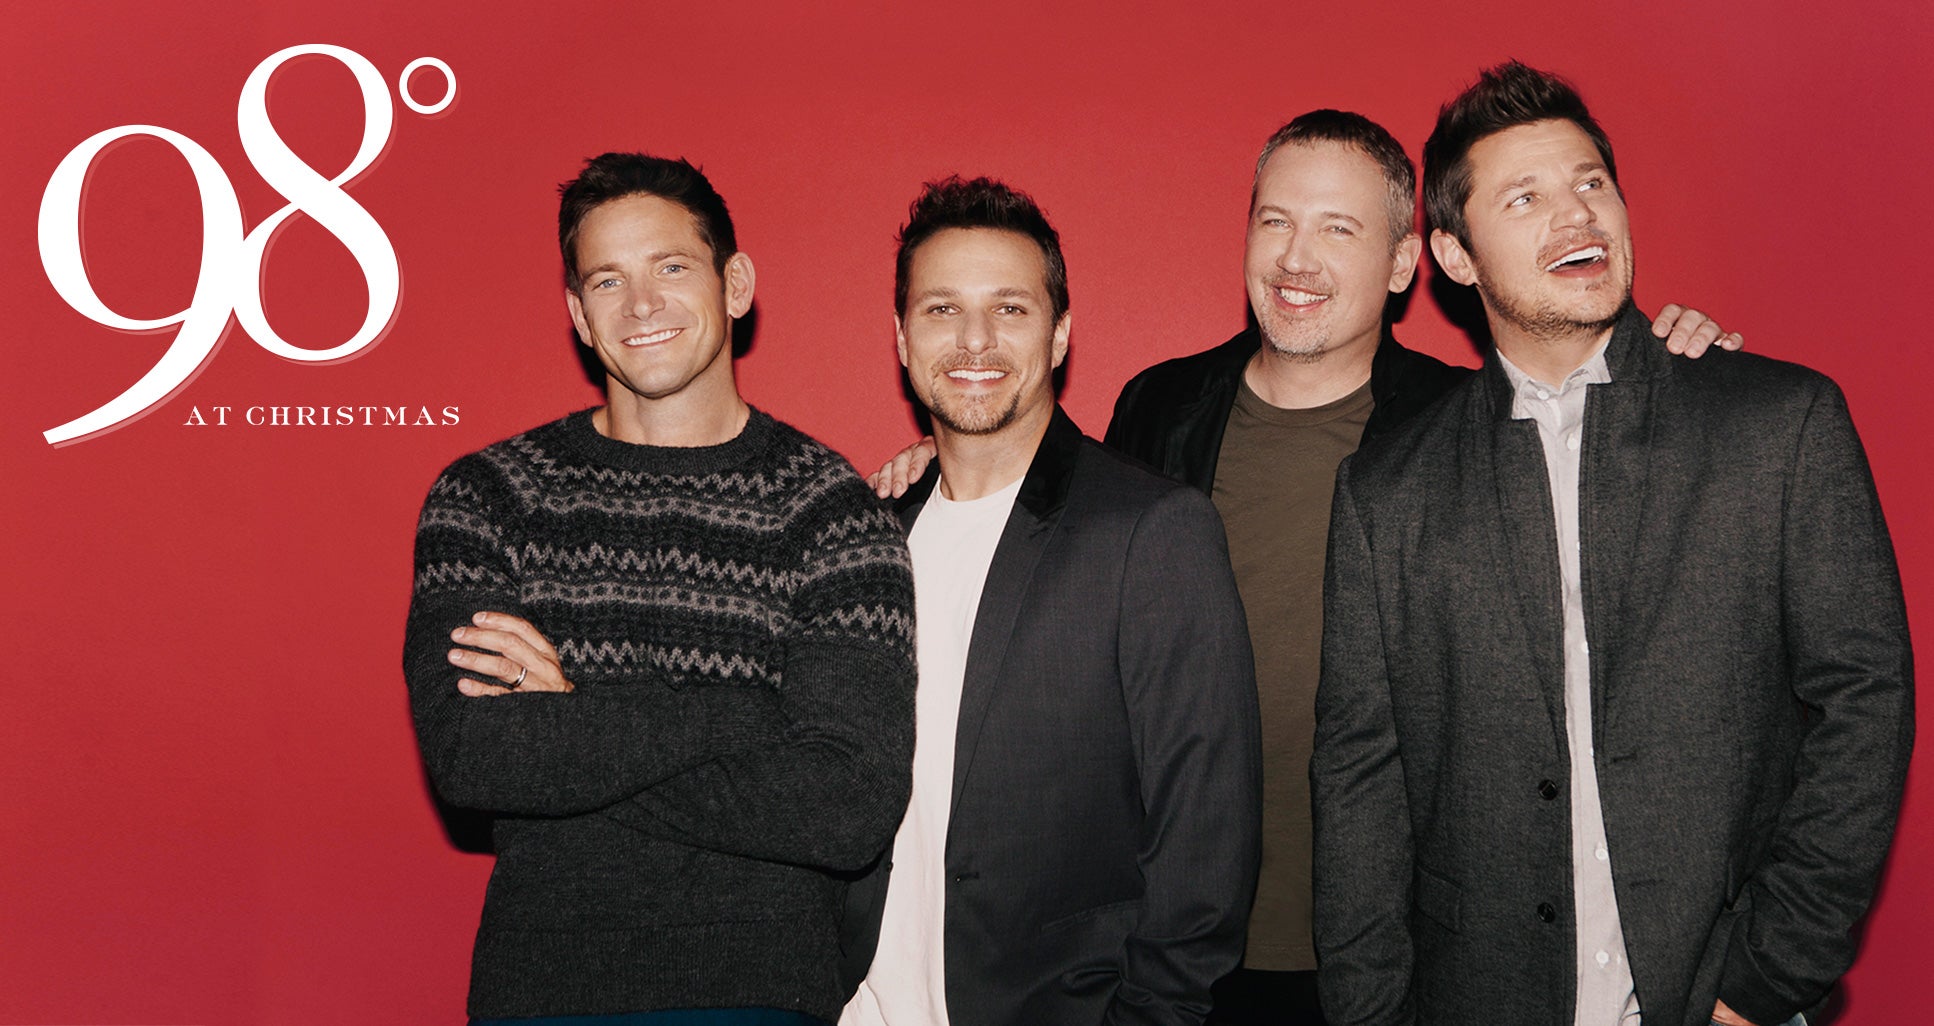 98 Degrees at Christmas Dominion Energy Center Official Website